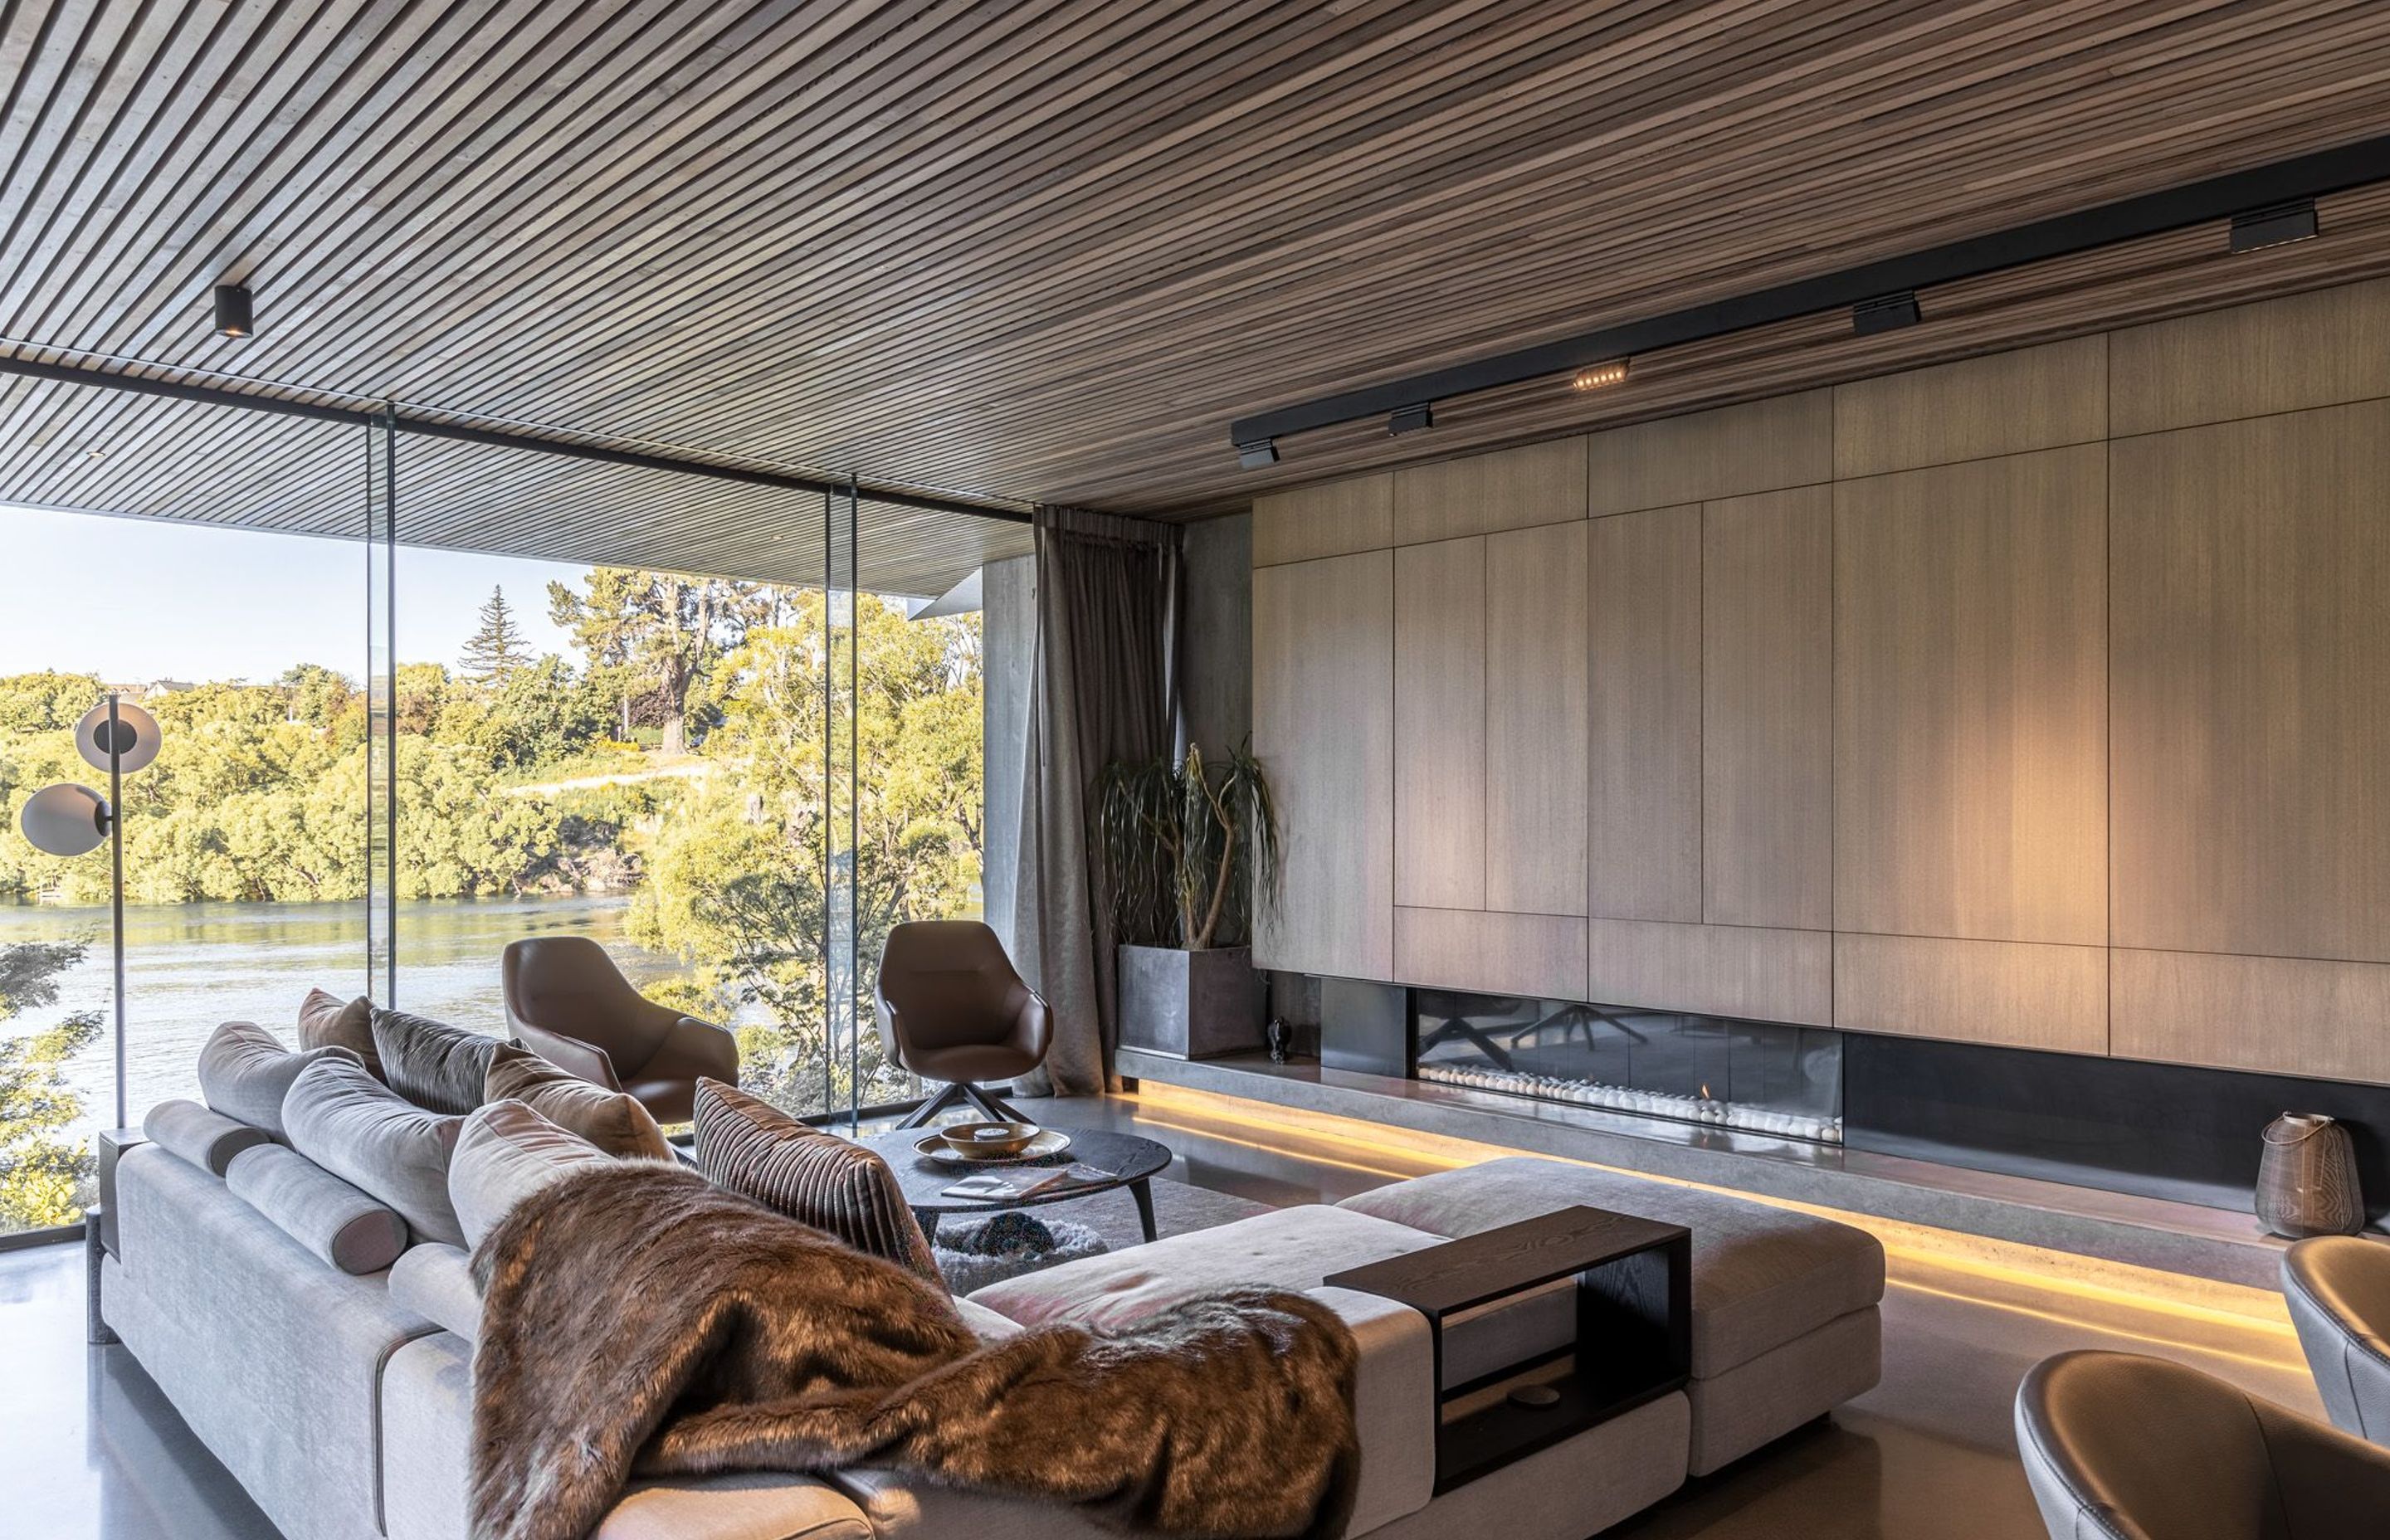 Cedar-panelled ceilings in the living spaces continue through the glass, helping to connect the inside with the stunning surrounding landscape.